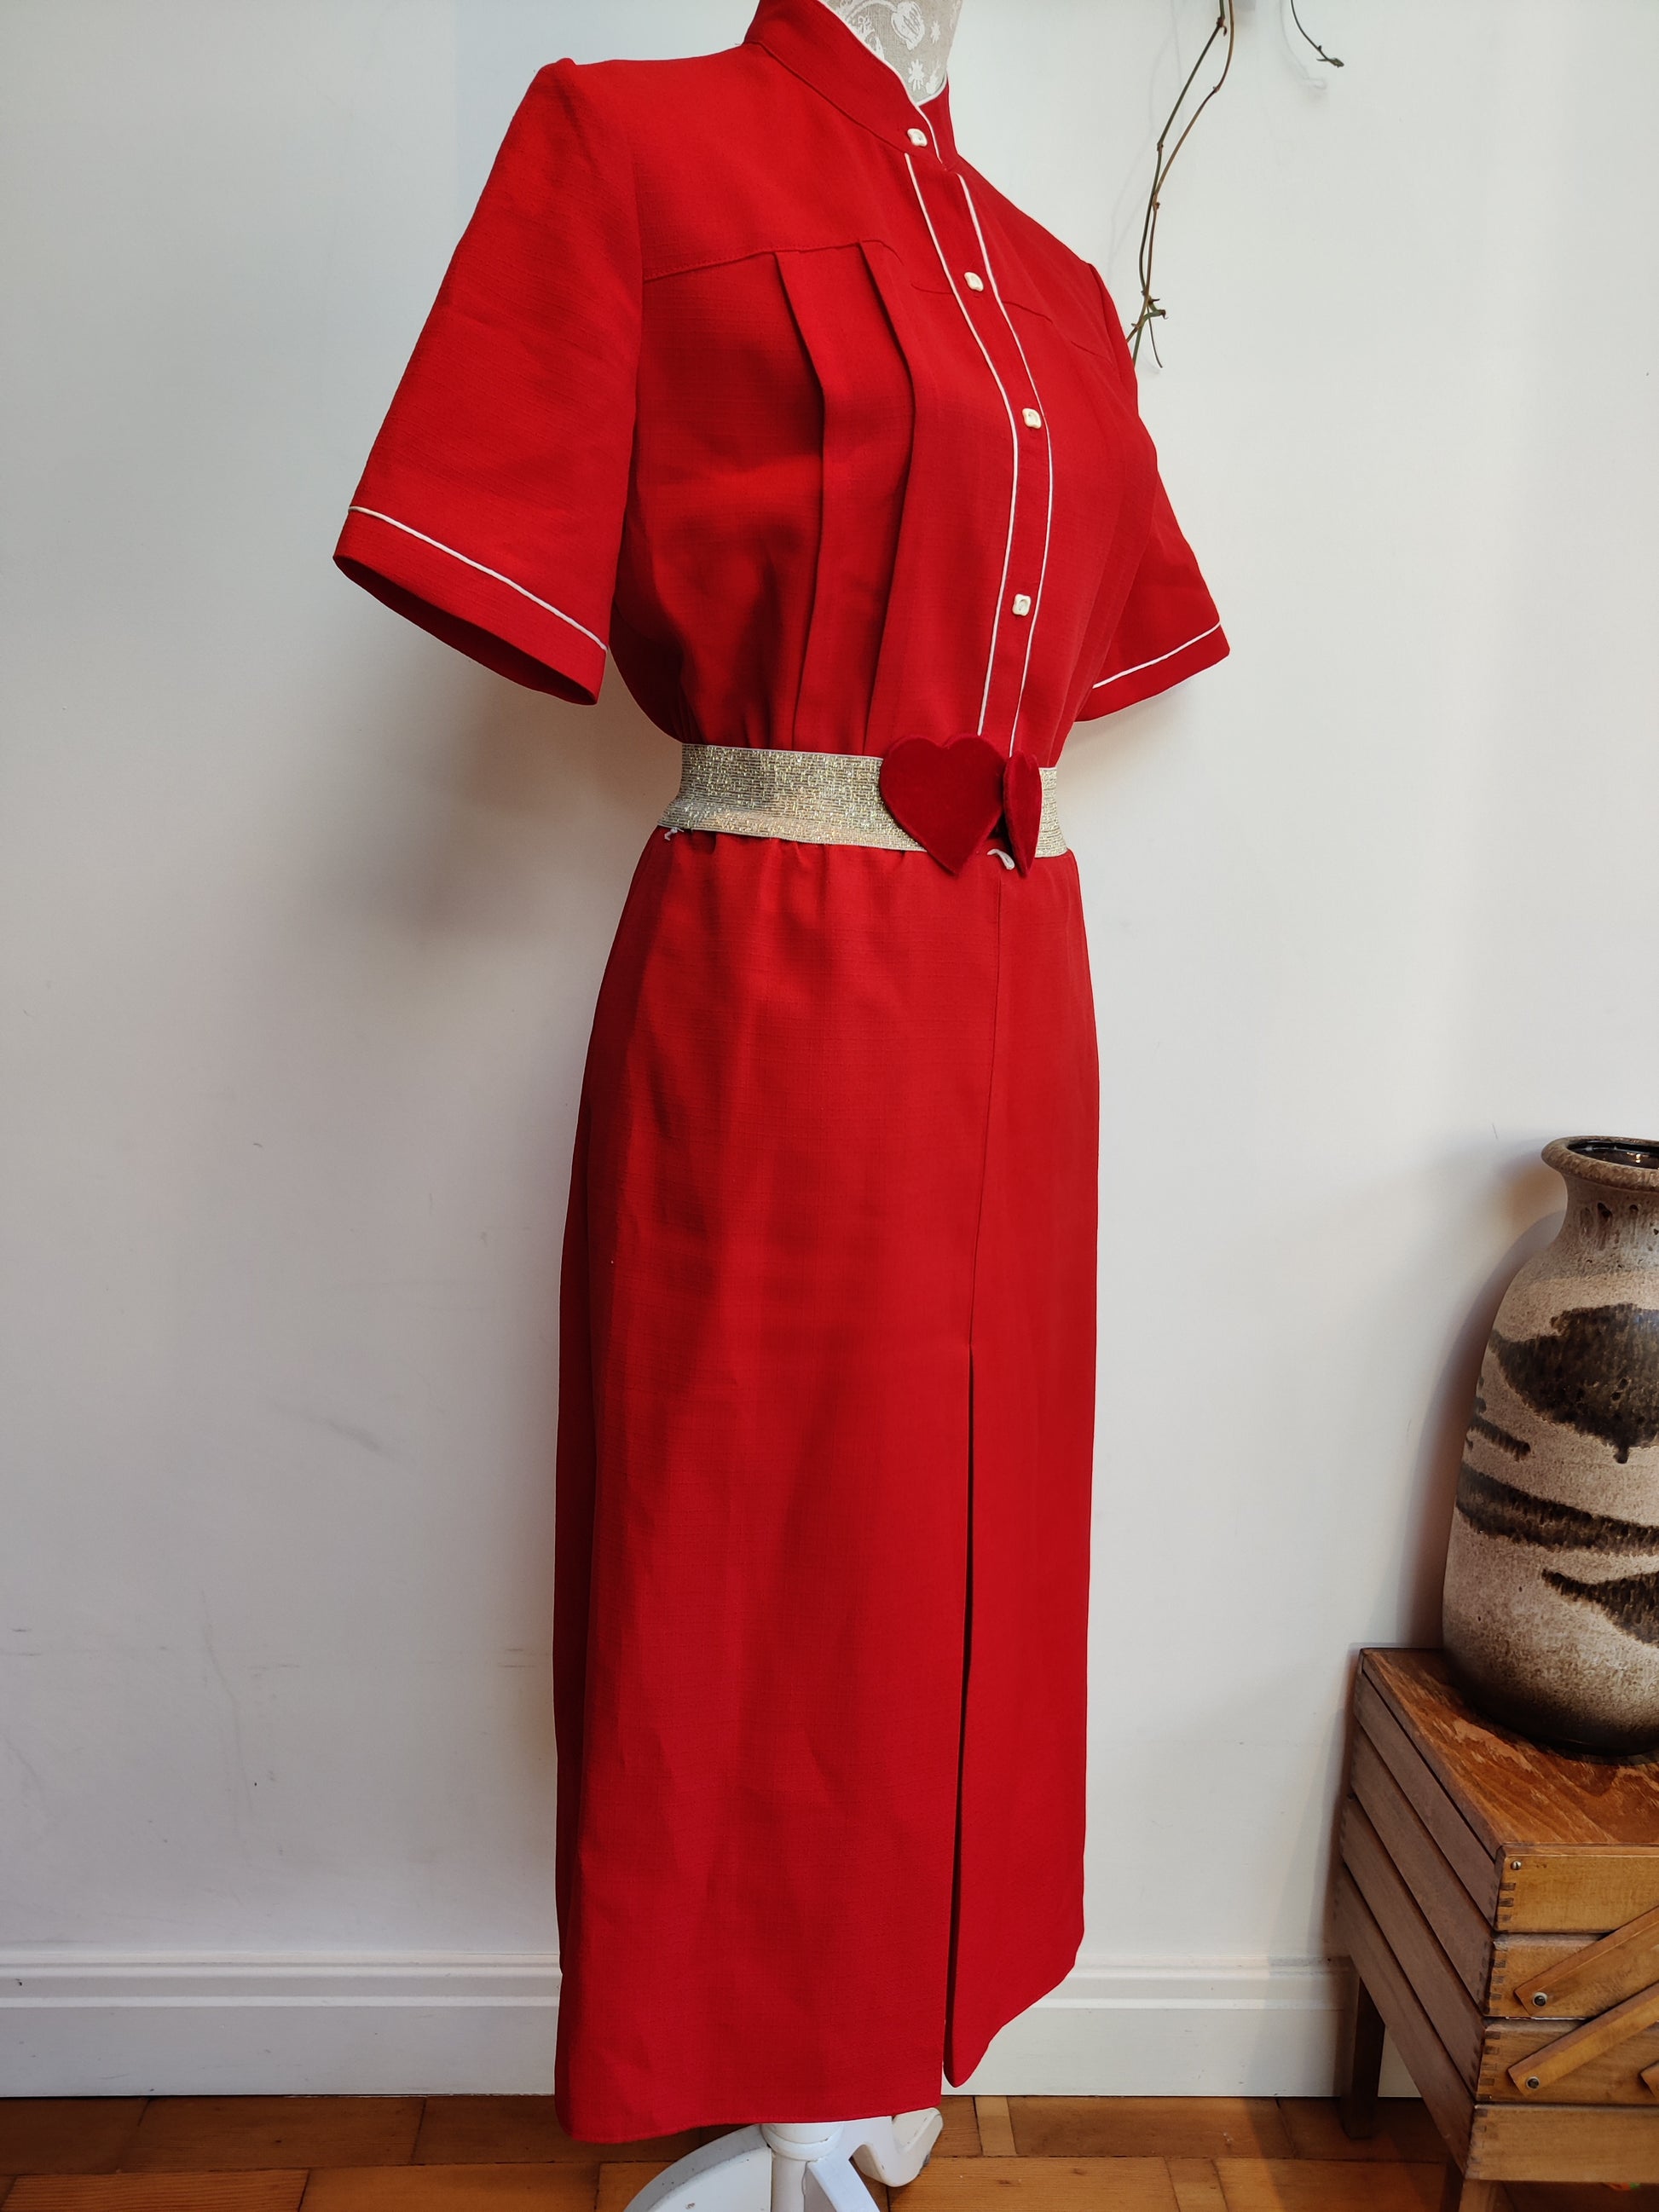 red 50s style dress